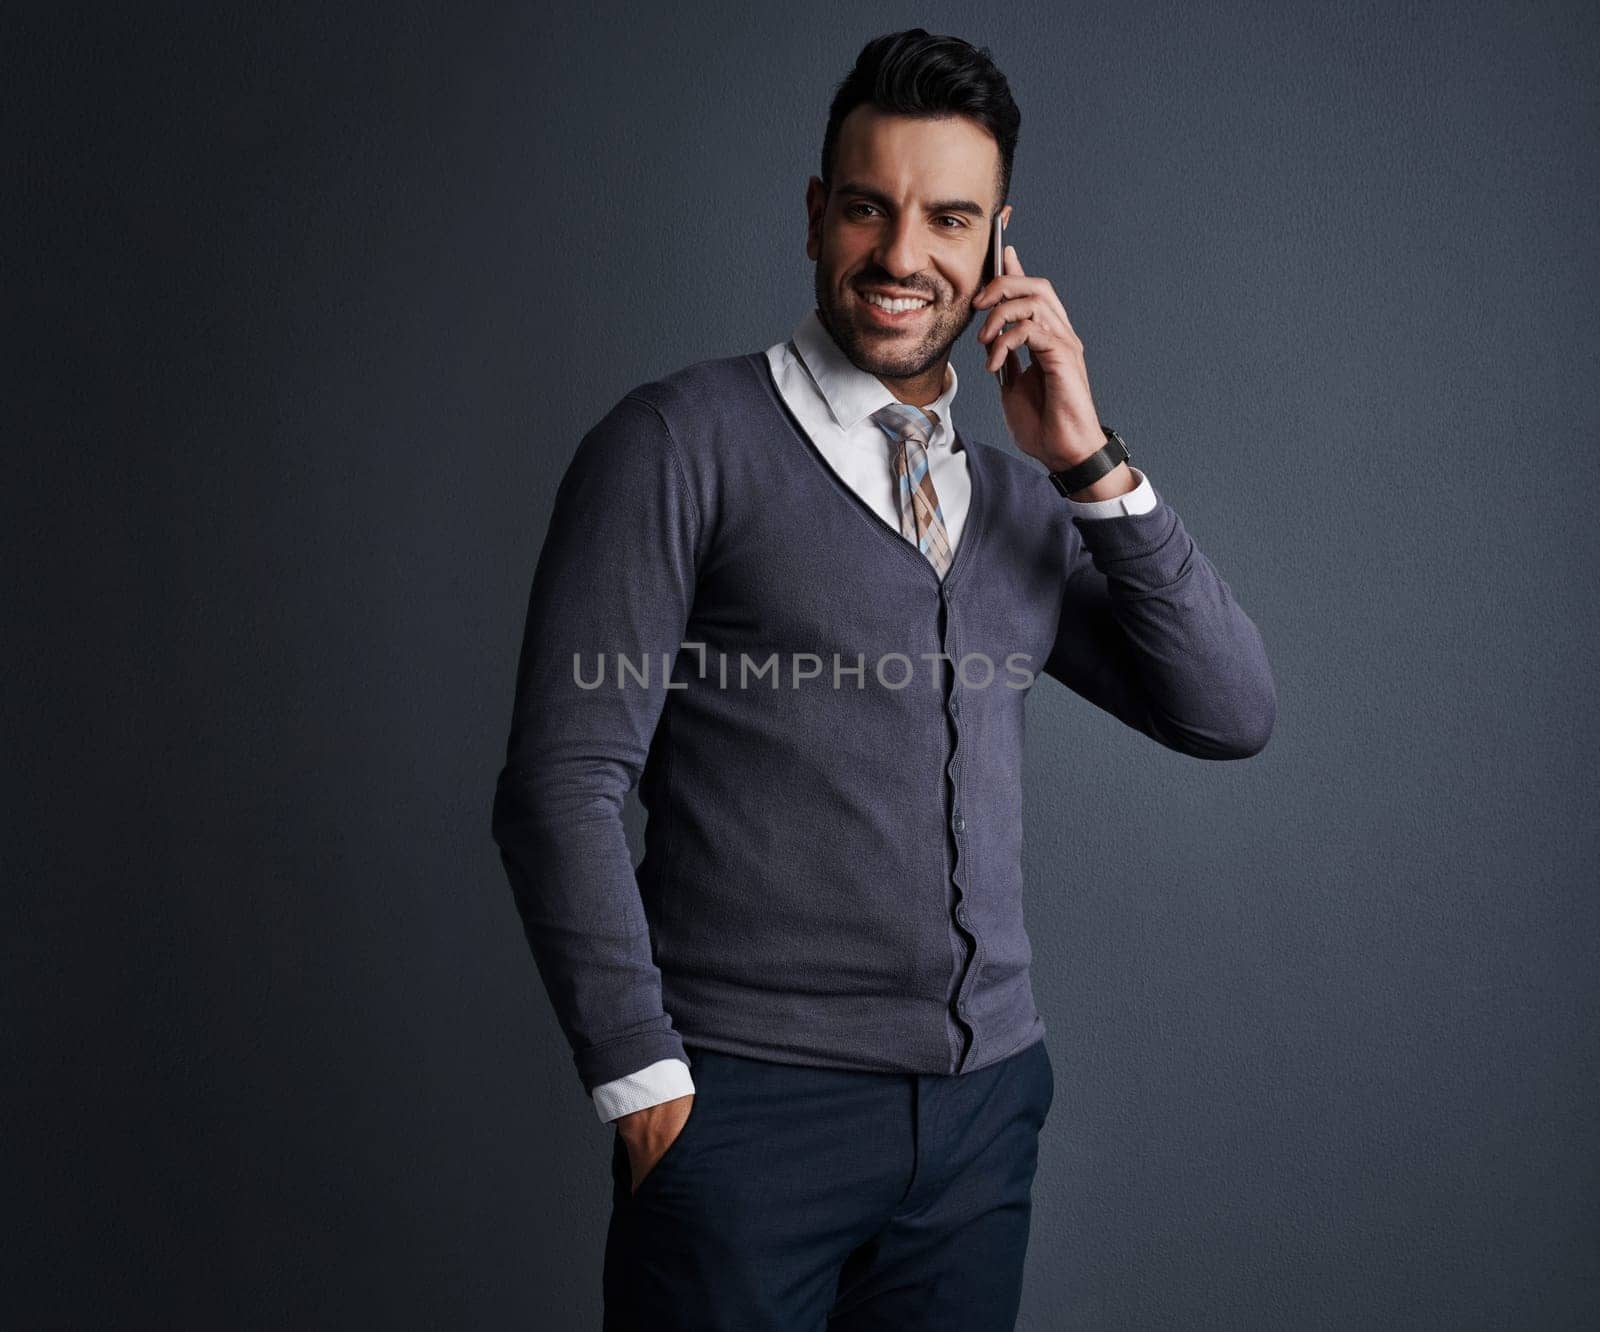 Hes perfected the art of business communication. Studio shot of a stylish young businessman using a mobile phone against a gray background. by YuriArcurs